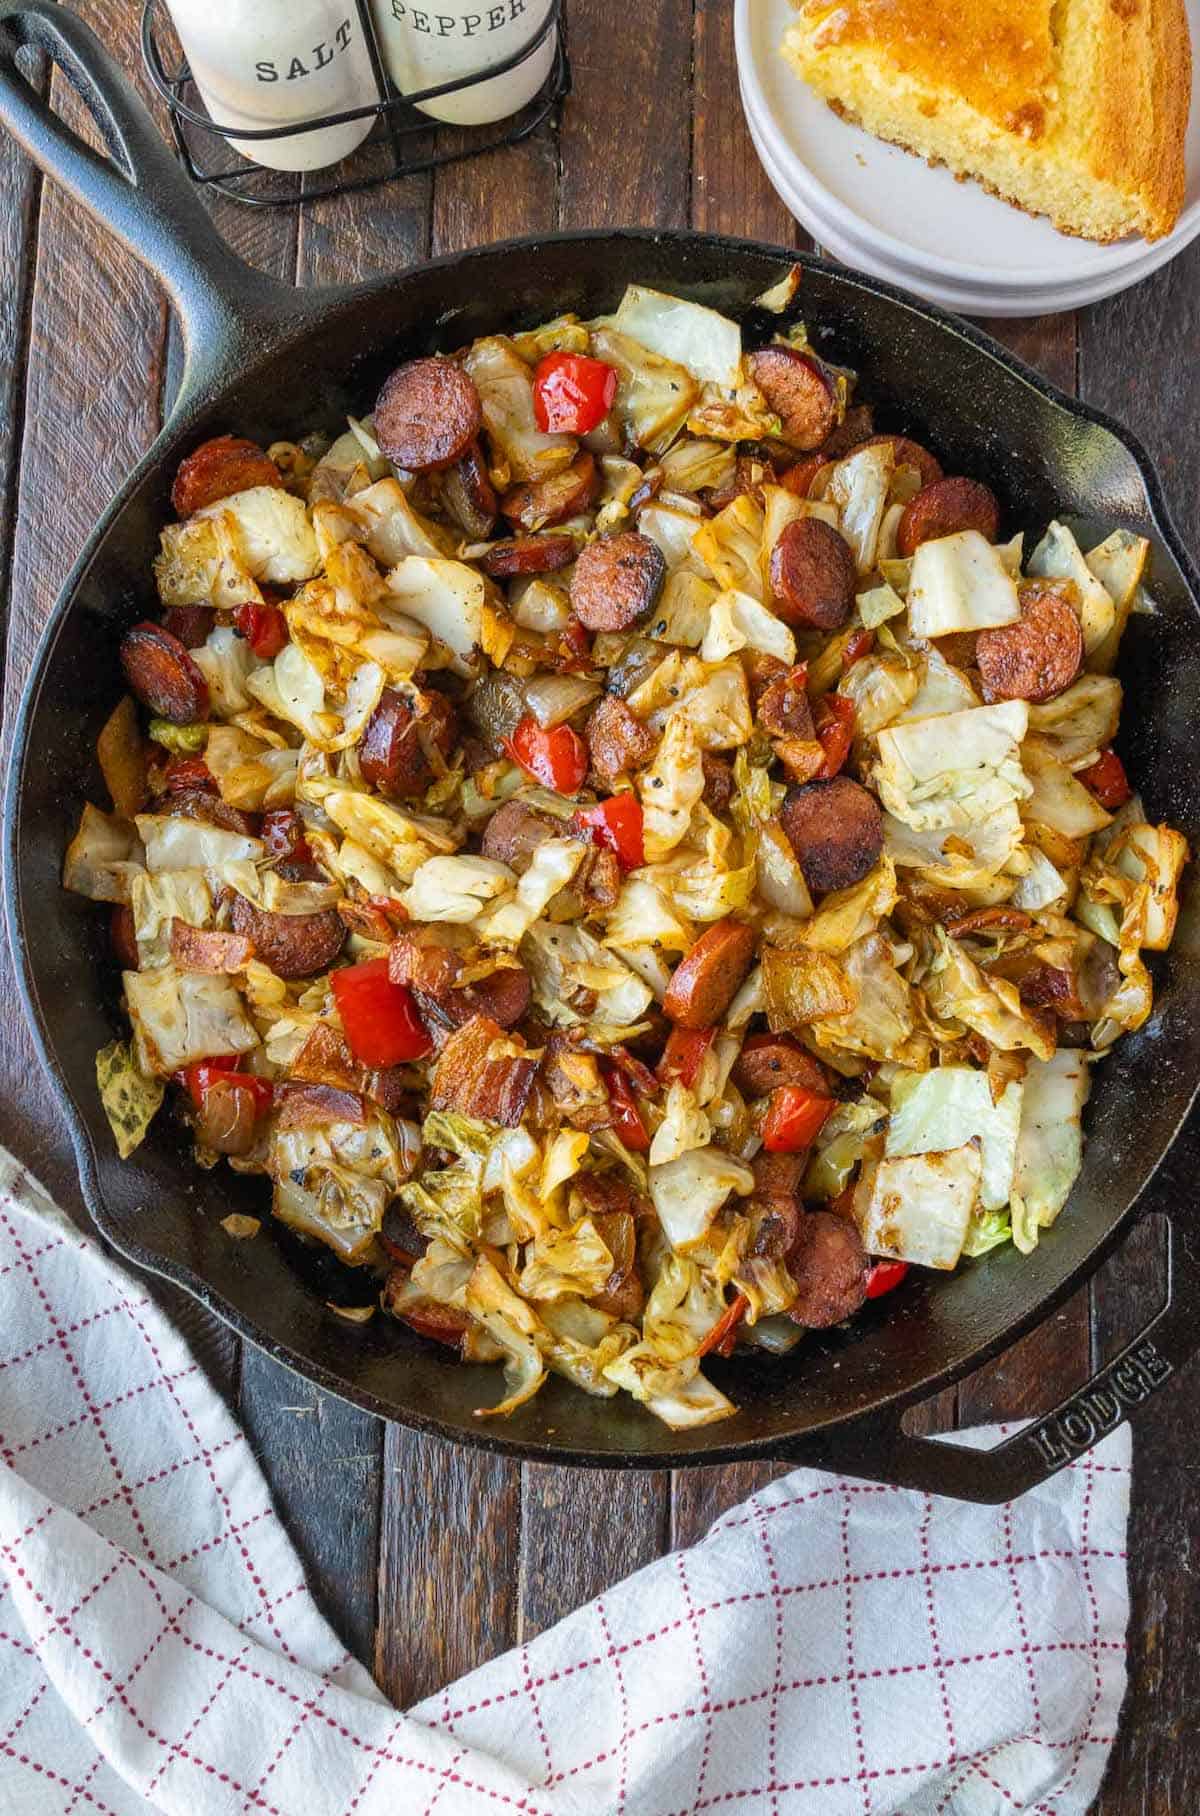 Fried cabbage with sausage in a cast iron skillet.